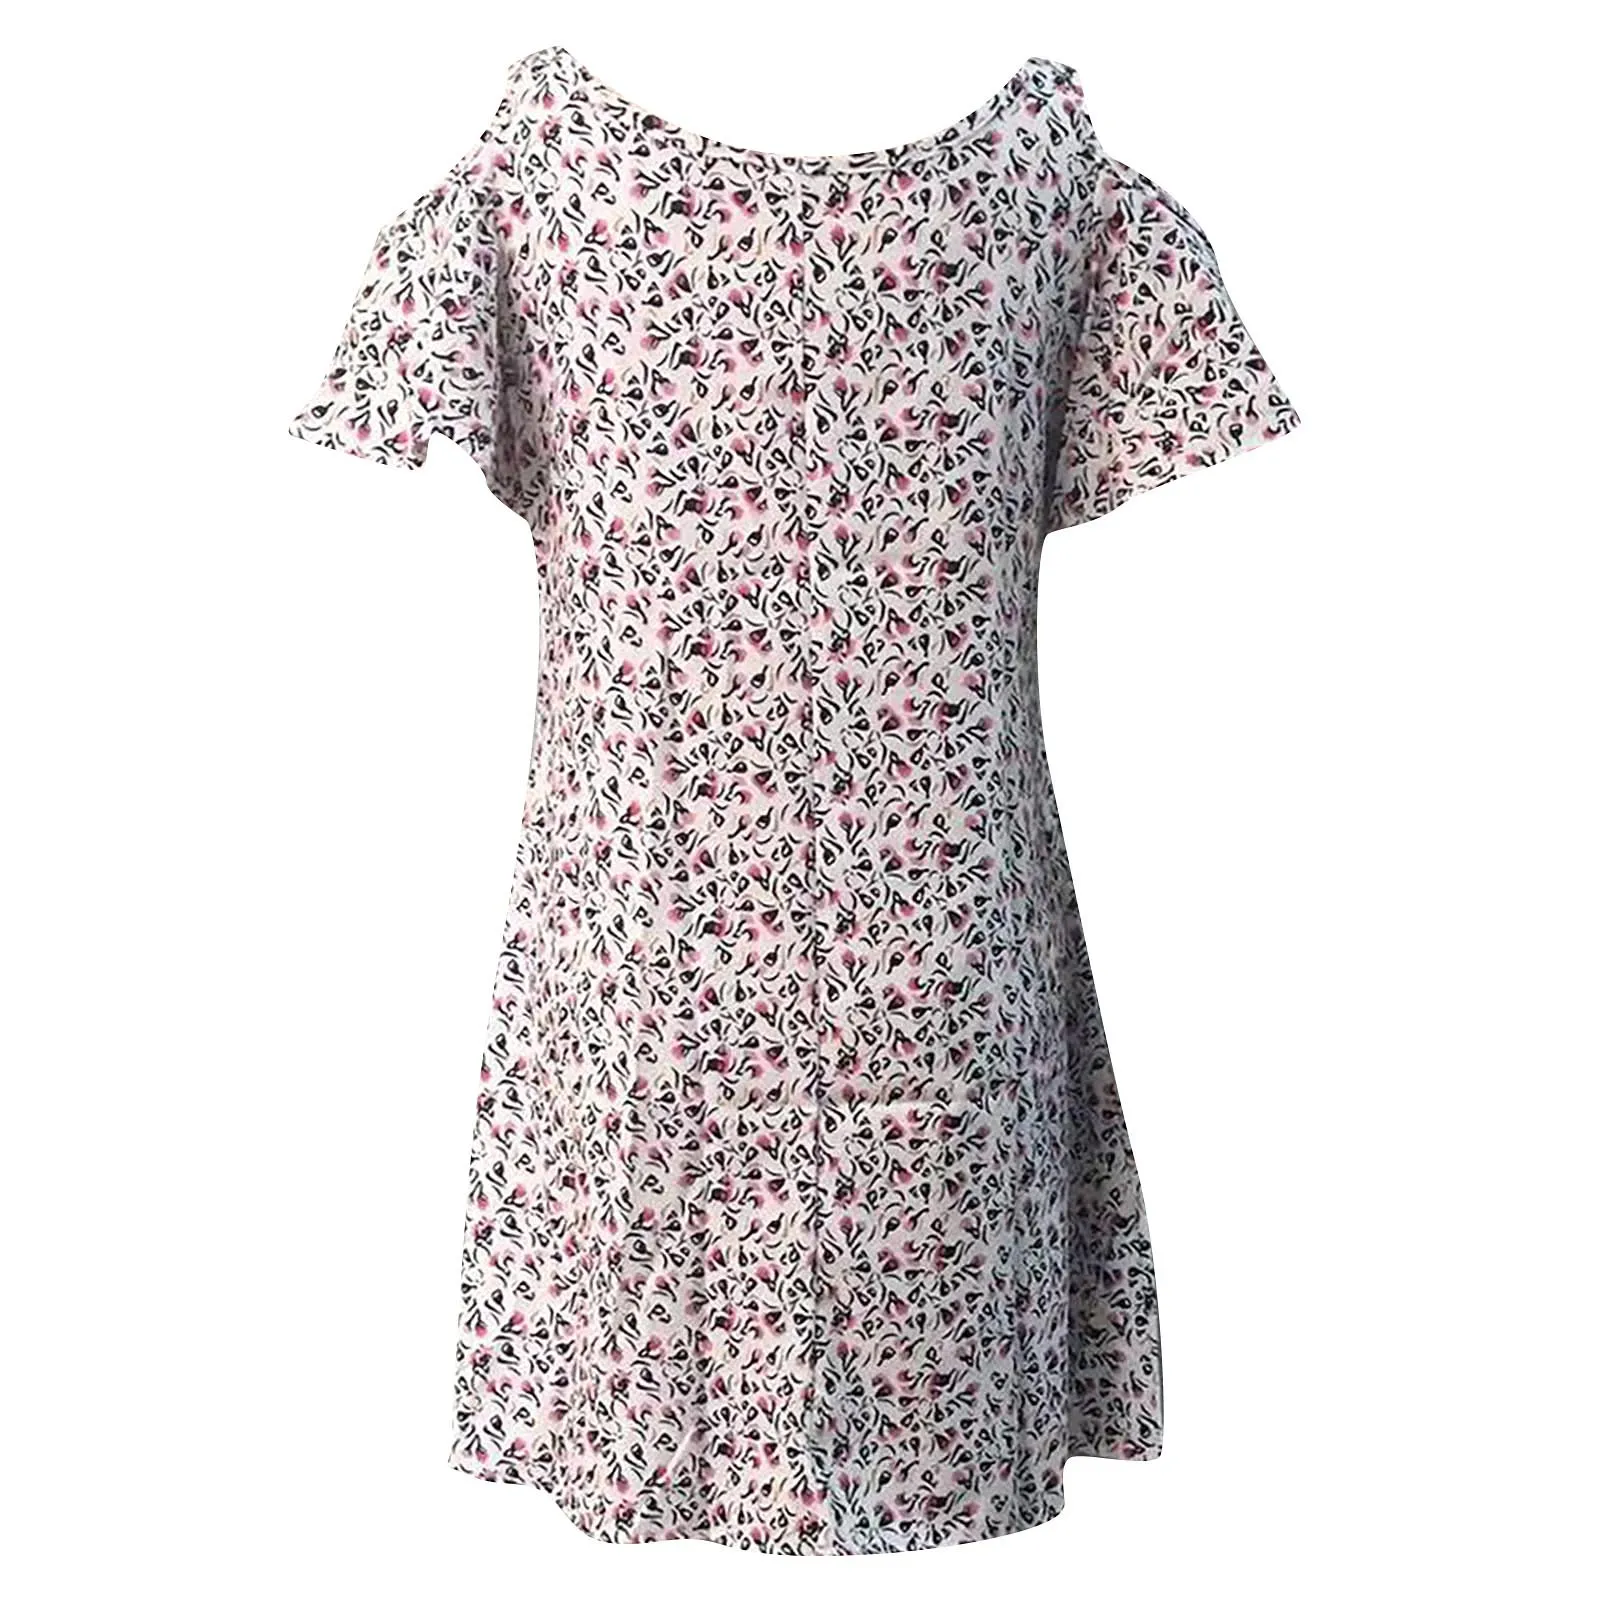 Women Summer Bohemian O-neck Printed Short-sleeved Strapless Pullover Dresses 2021 casual floral print beach dress Vestidos cute bathing suit cover ups